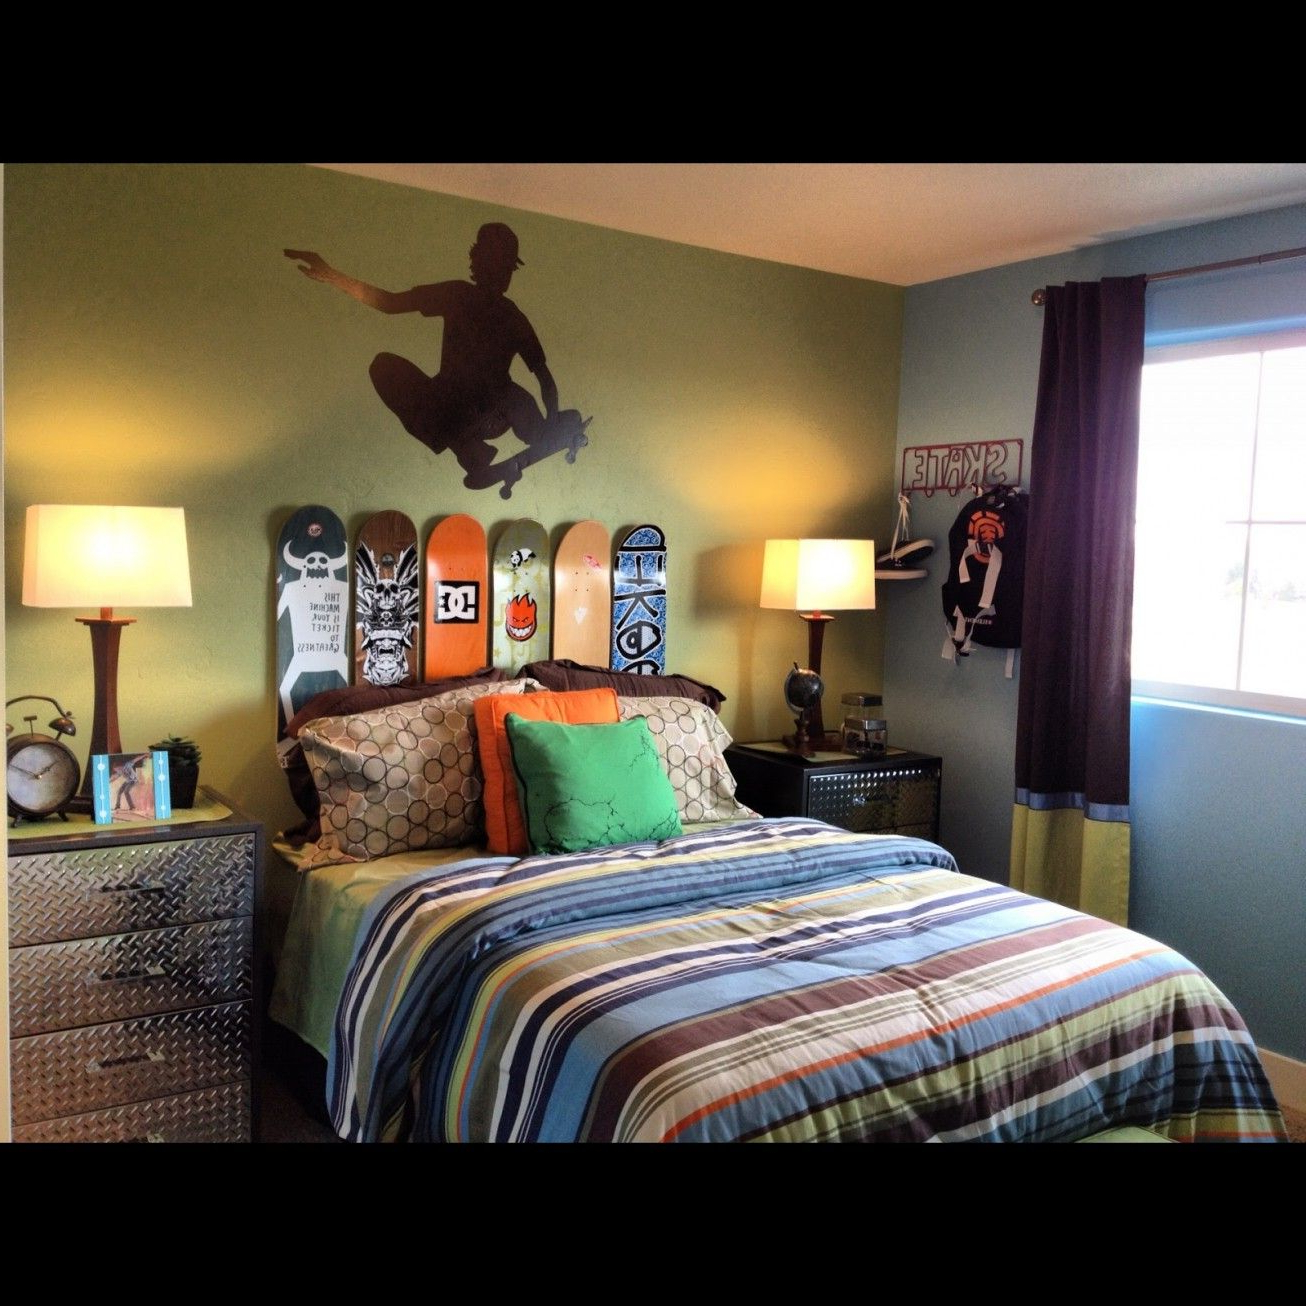 Some Uniqueness Of Skateboard Bedroom Decor For Kids